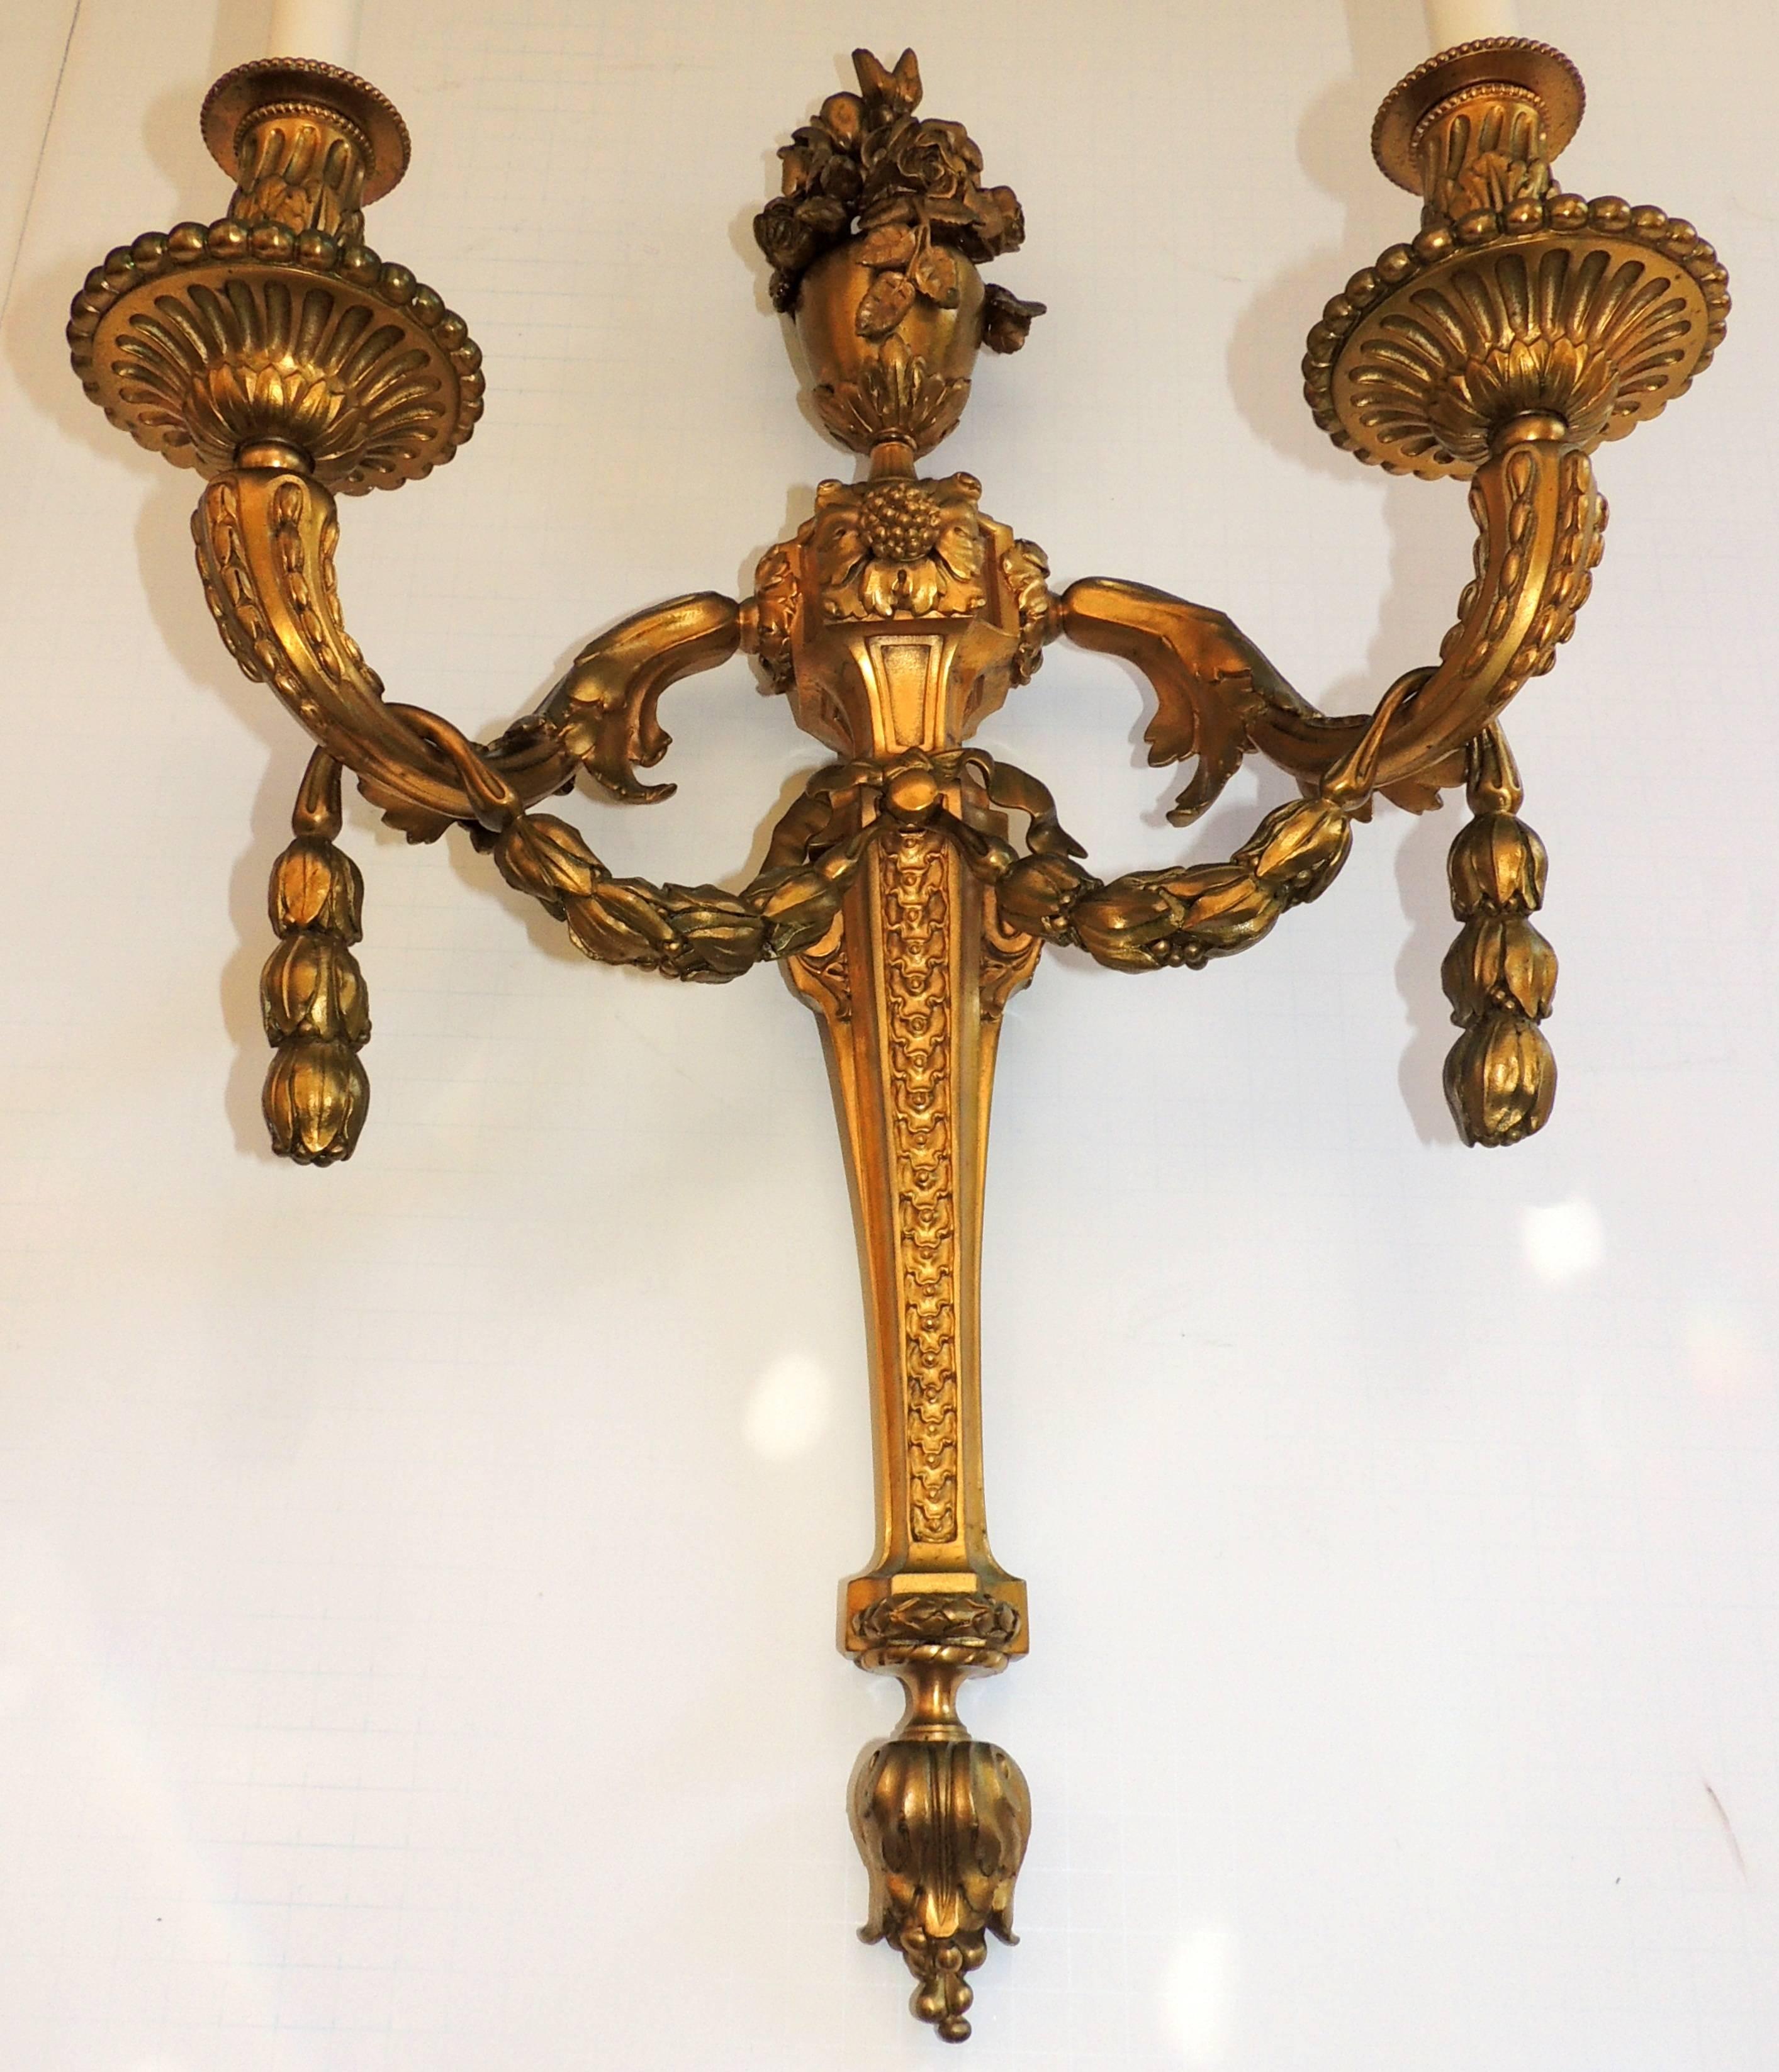 Wonderful French Pair Two-Arm Gilt Dore Bronze Urn Floral Garland Swag Sconces 1